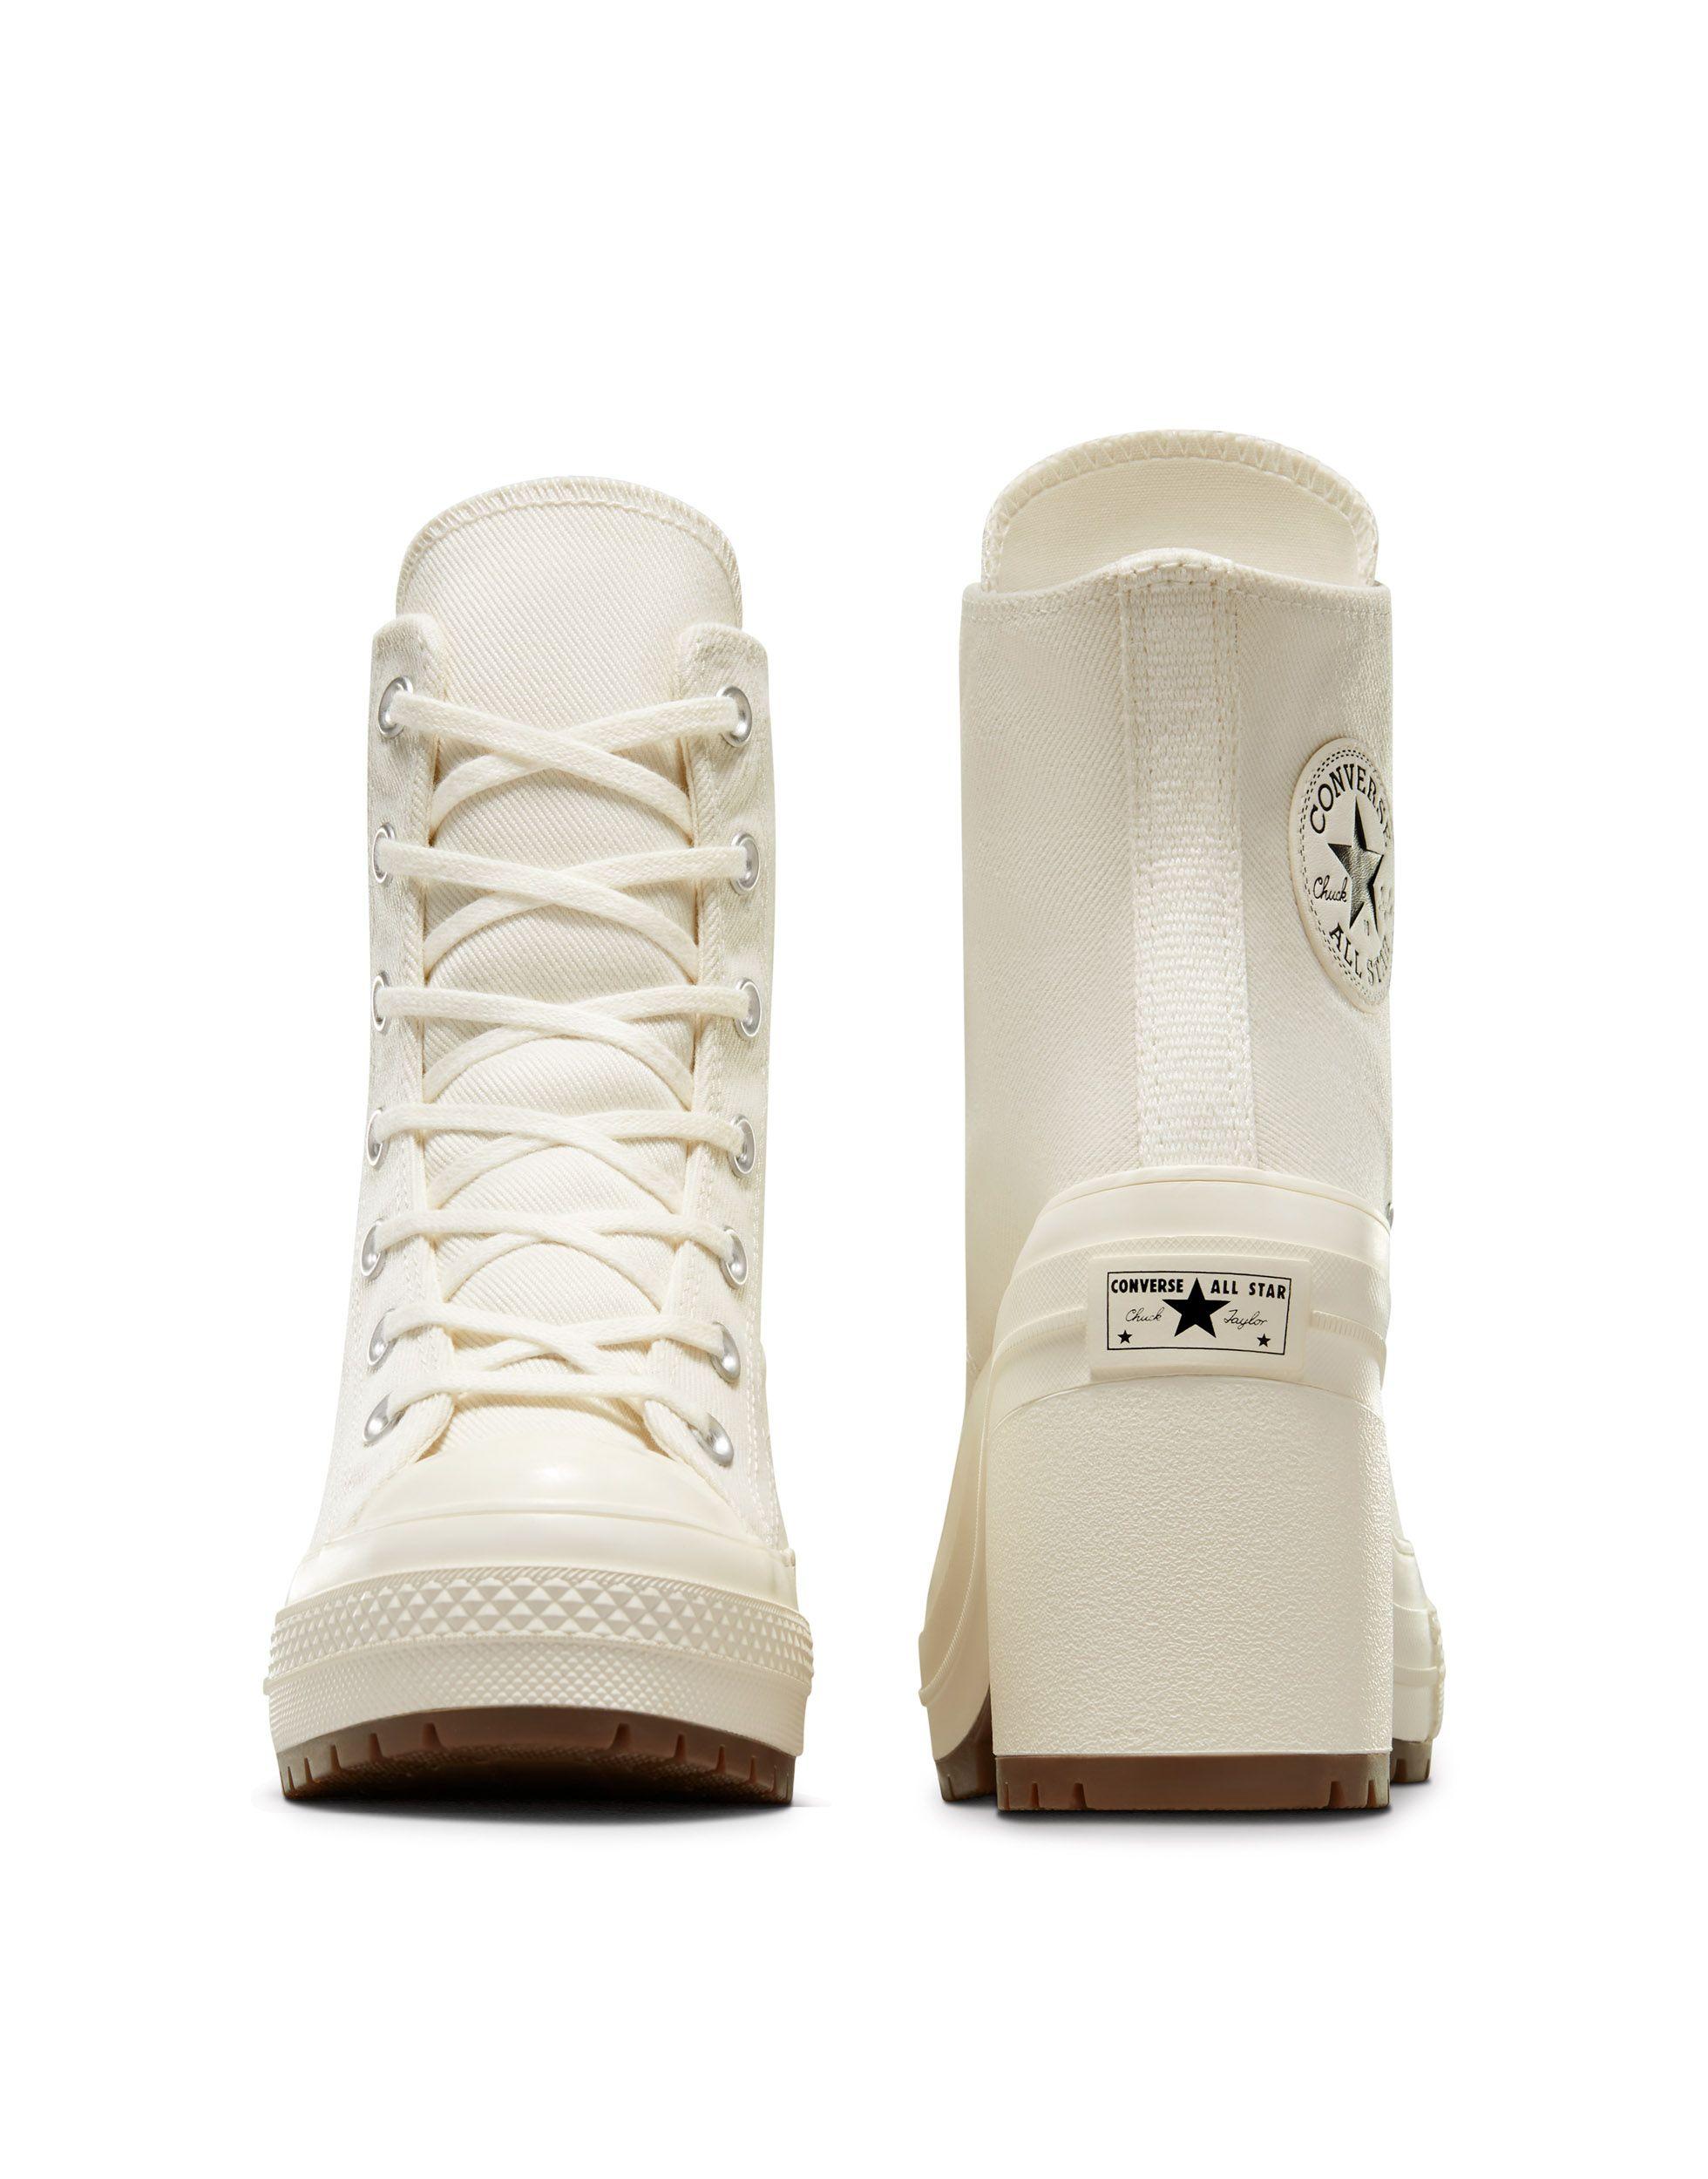 Converse Chuck Taylor 70s Deluxe Heeled Sneakers in White | Lyst